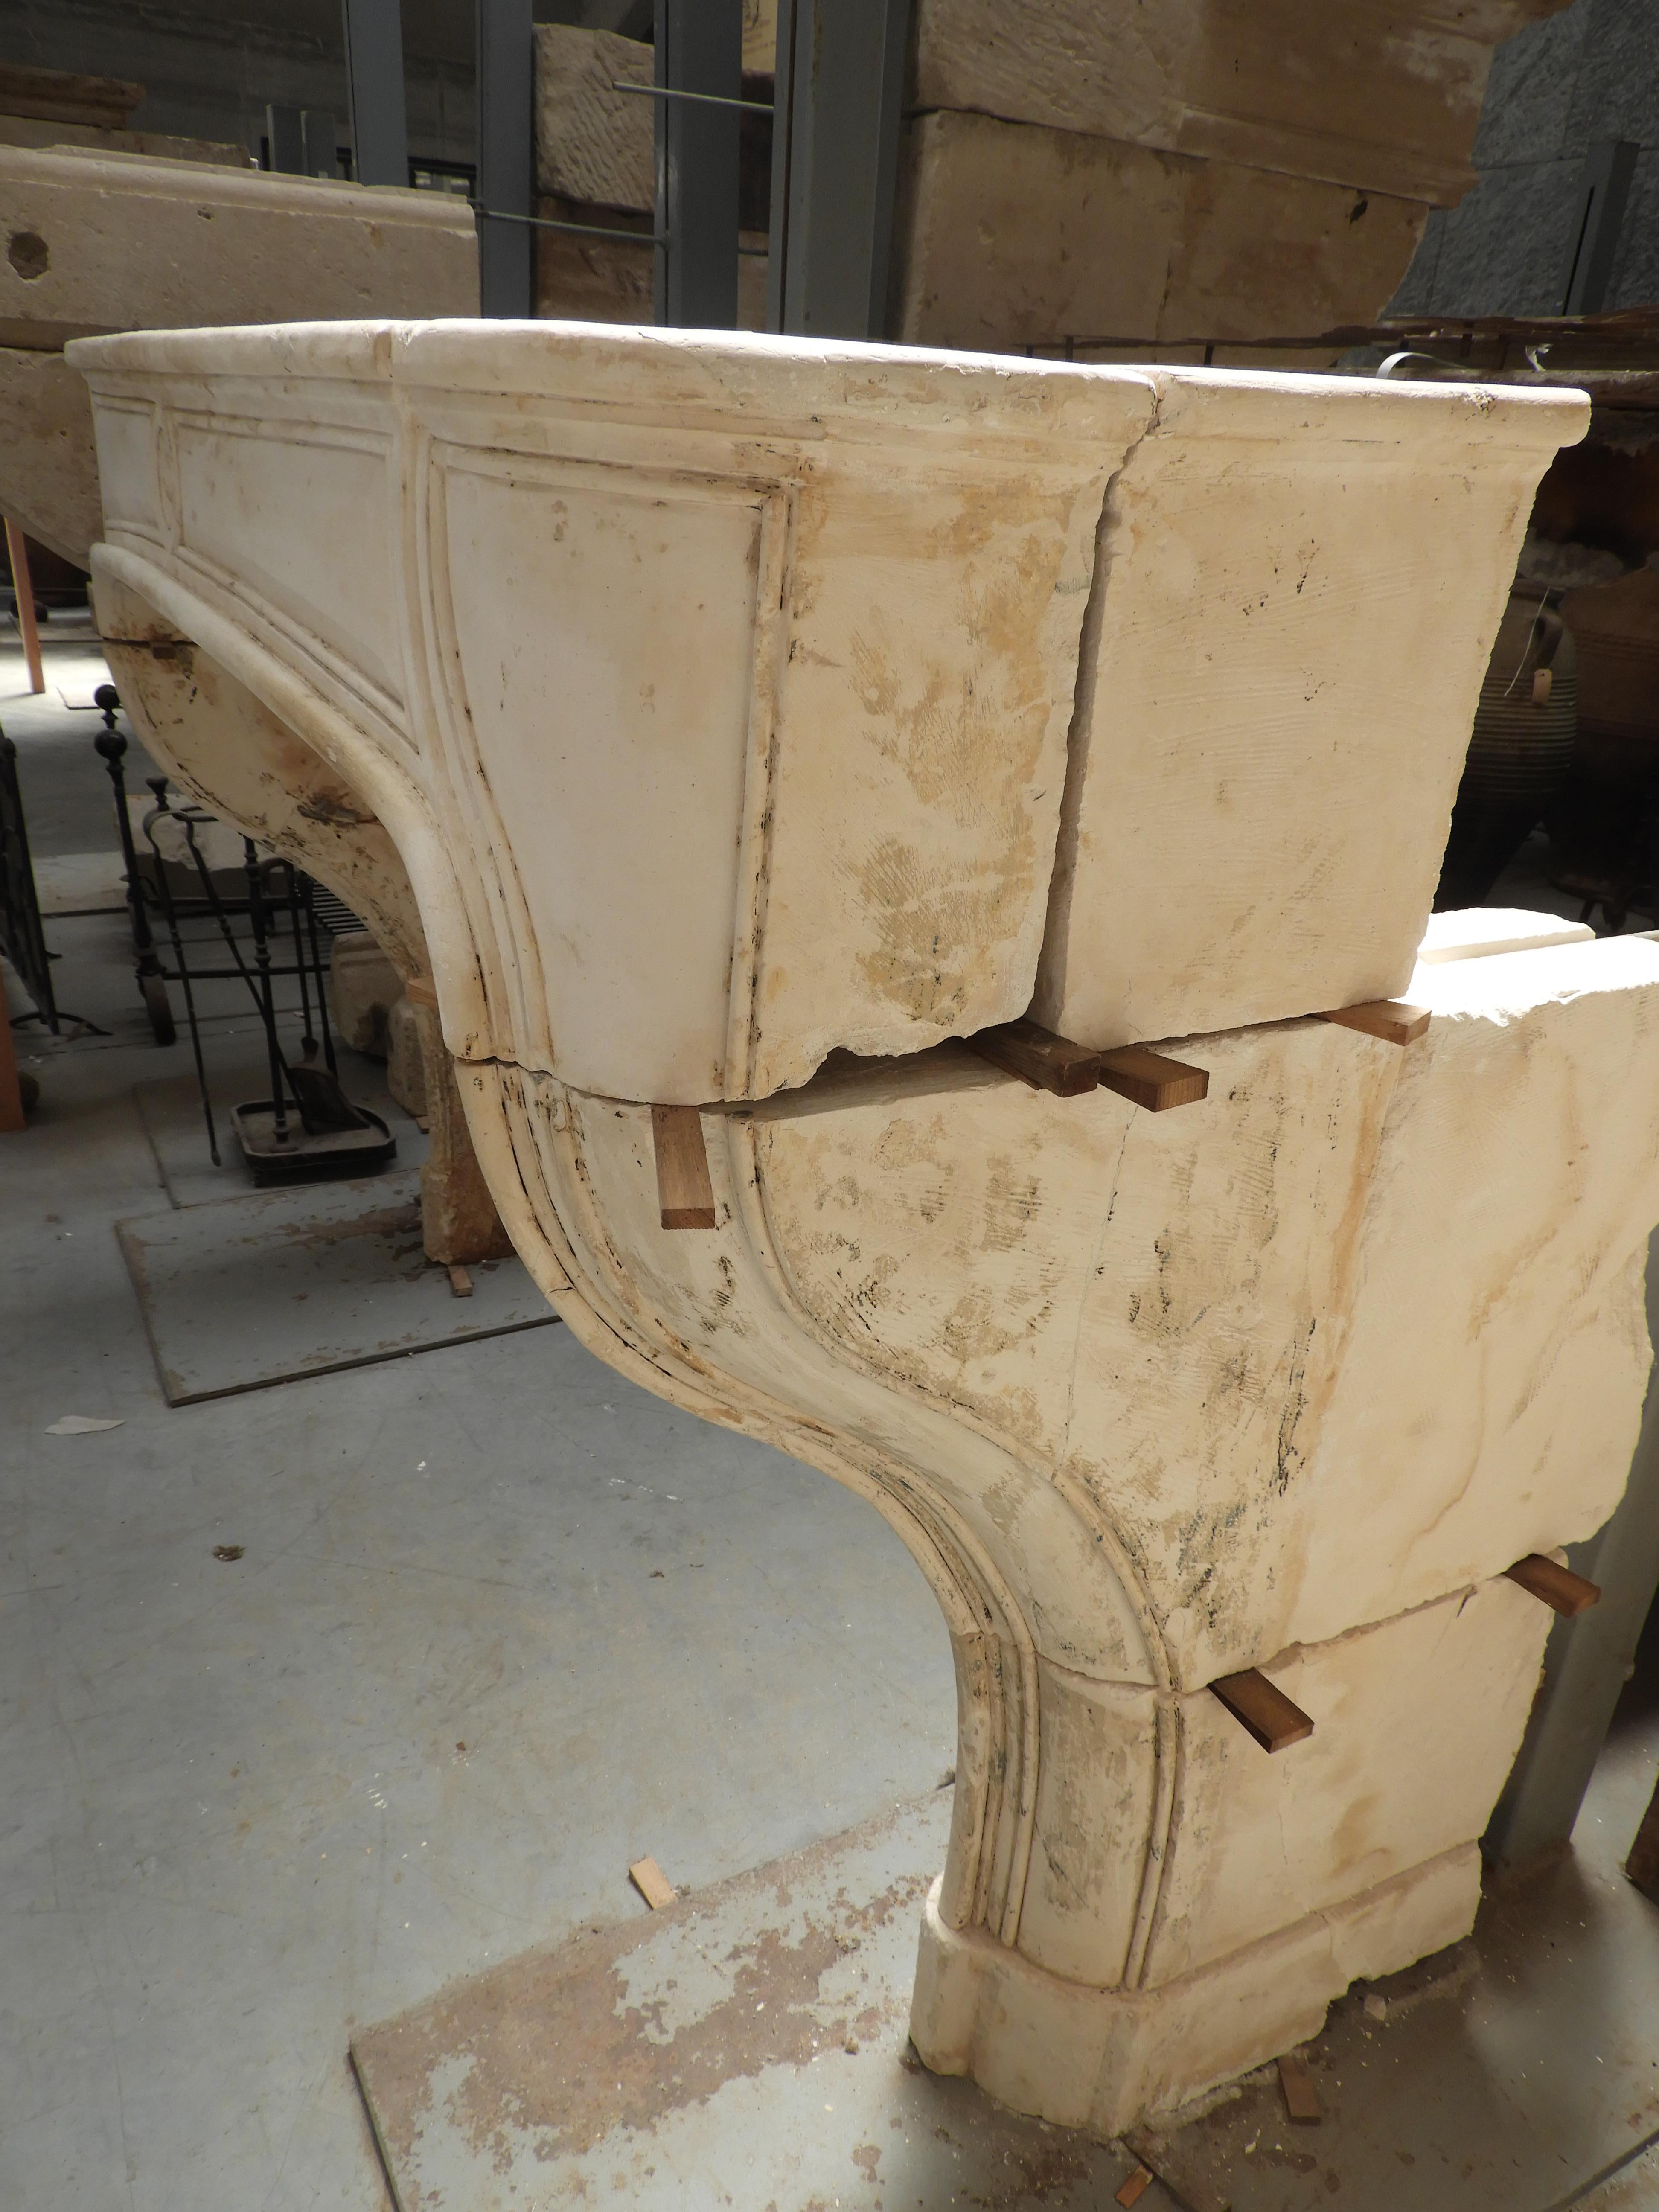 Early 19th century French limestone white or beige fireplace, from the Marne area in France. The paint has been stripped by hand not to damage the surface of the stone to keep it original.